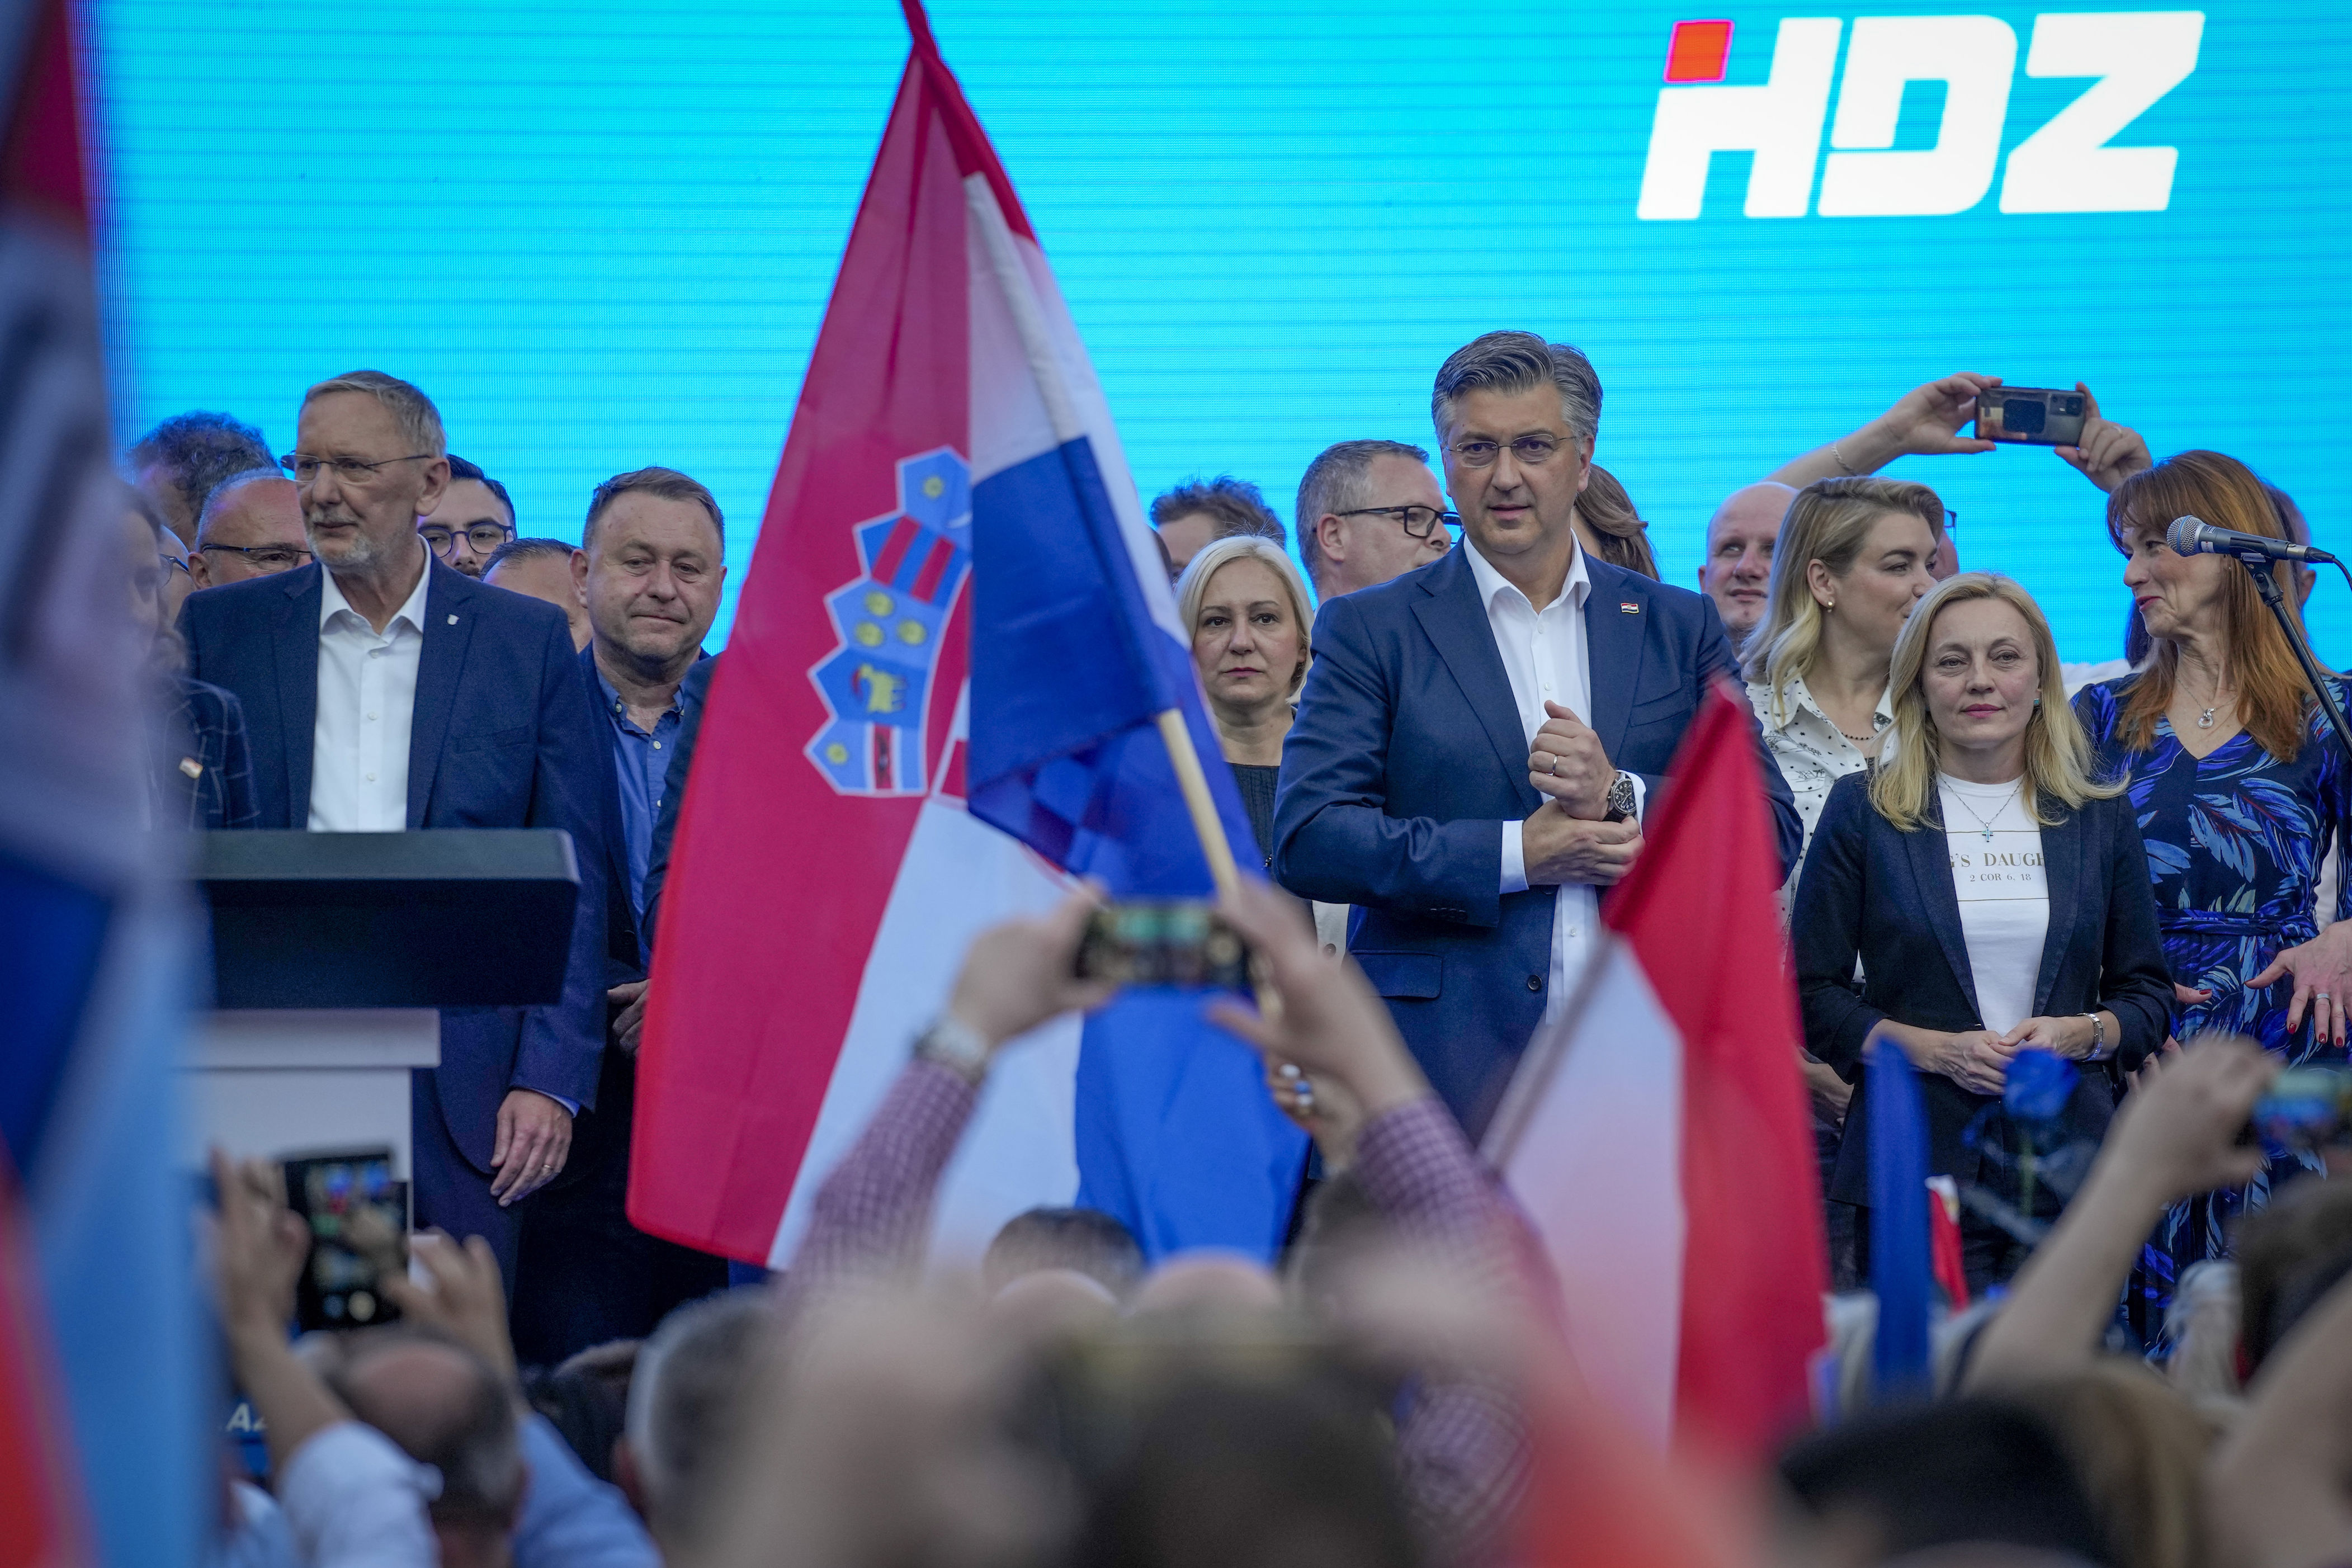 croatia's parliamentary election follows harsh contest between country's top two officials